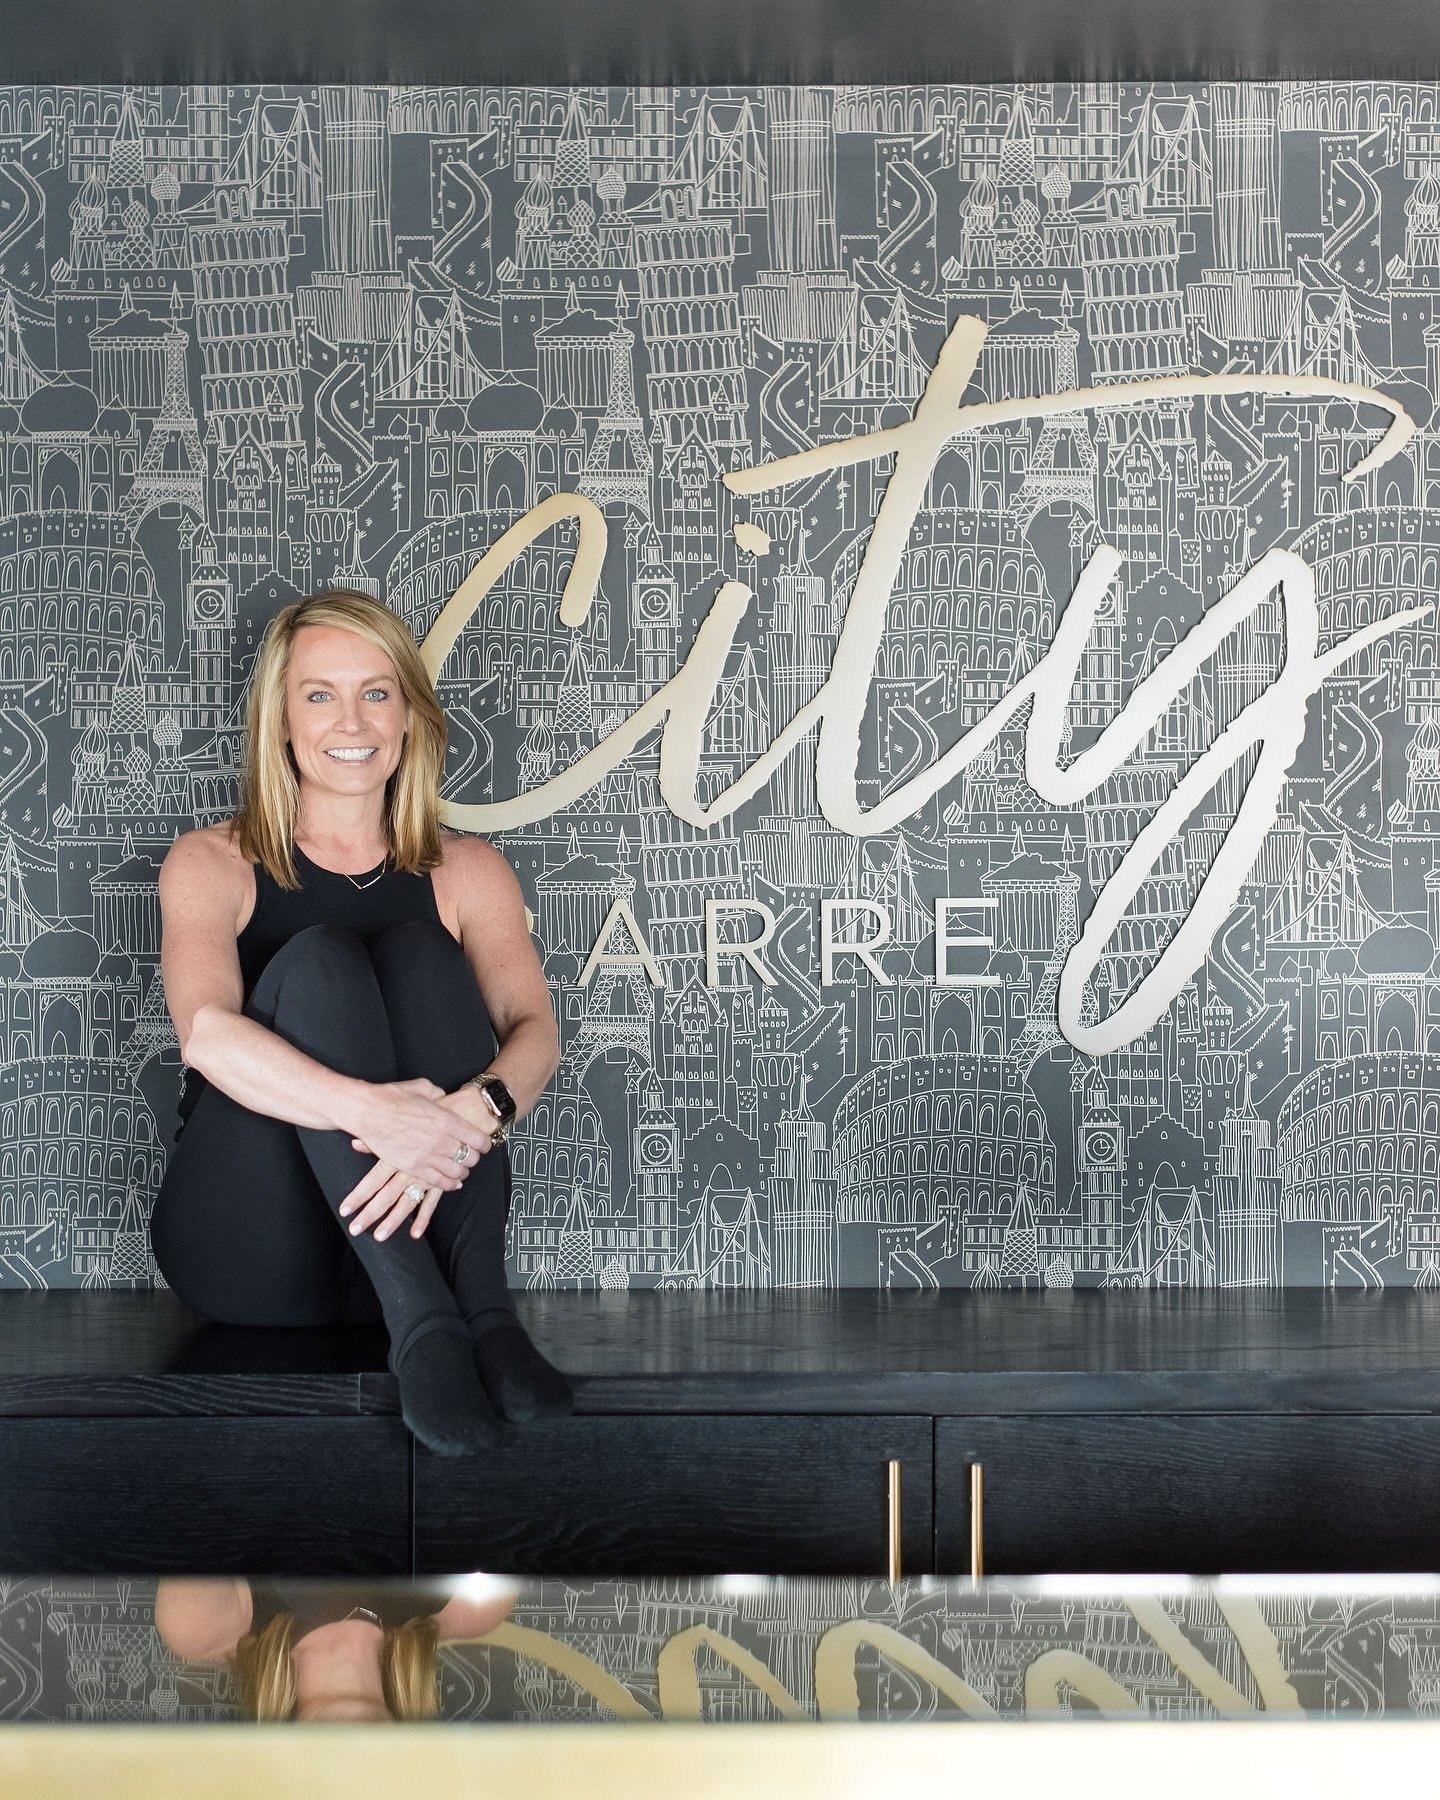 If we haven&rsquo;t met yet. . .I&rsquo;m Gretchen, the owner of City Barre!👋🏼
Before City Barre was born, our building was an old boat repair space. It took a lot of work but here we are almost six years later!! 🖤

It&rsquo;s amazing to think of 